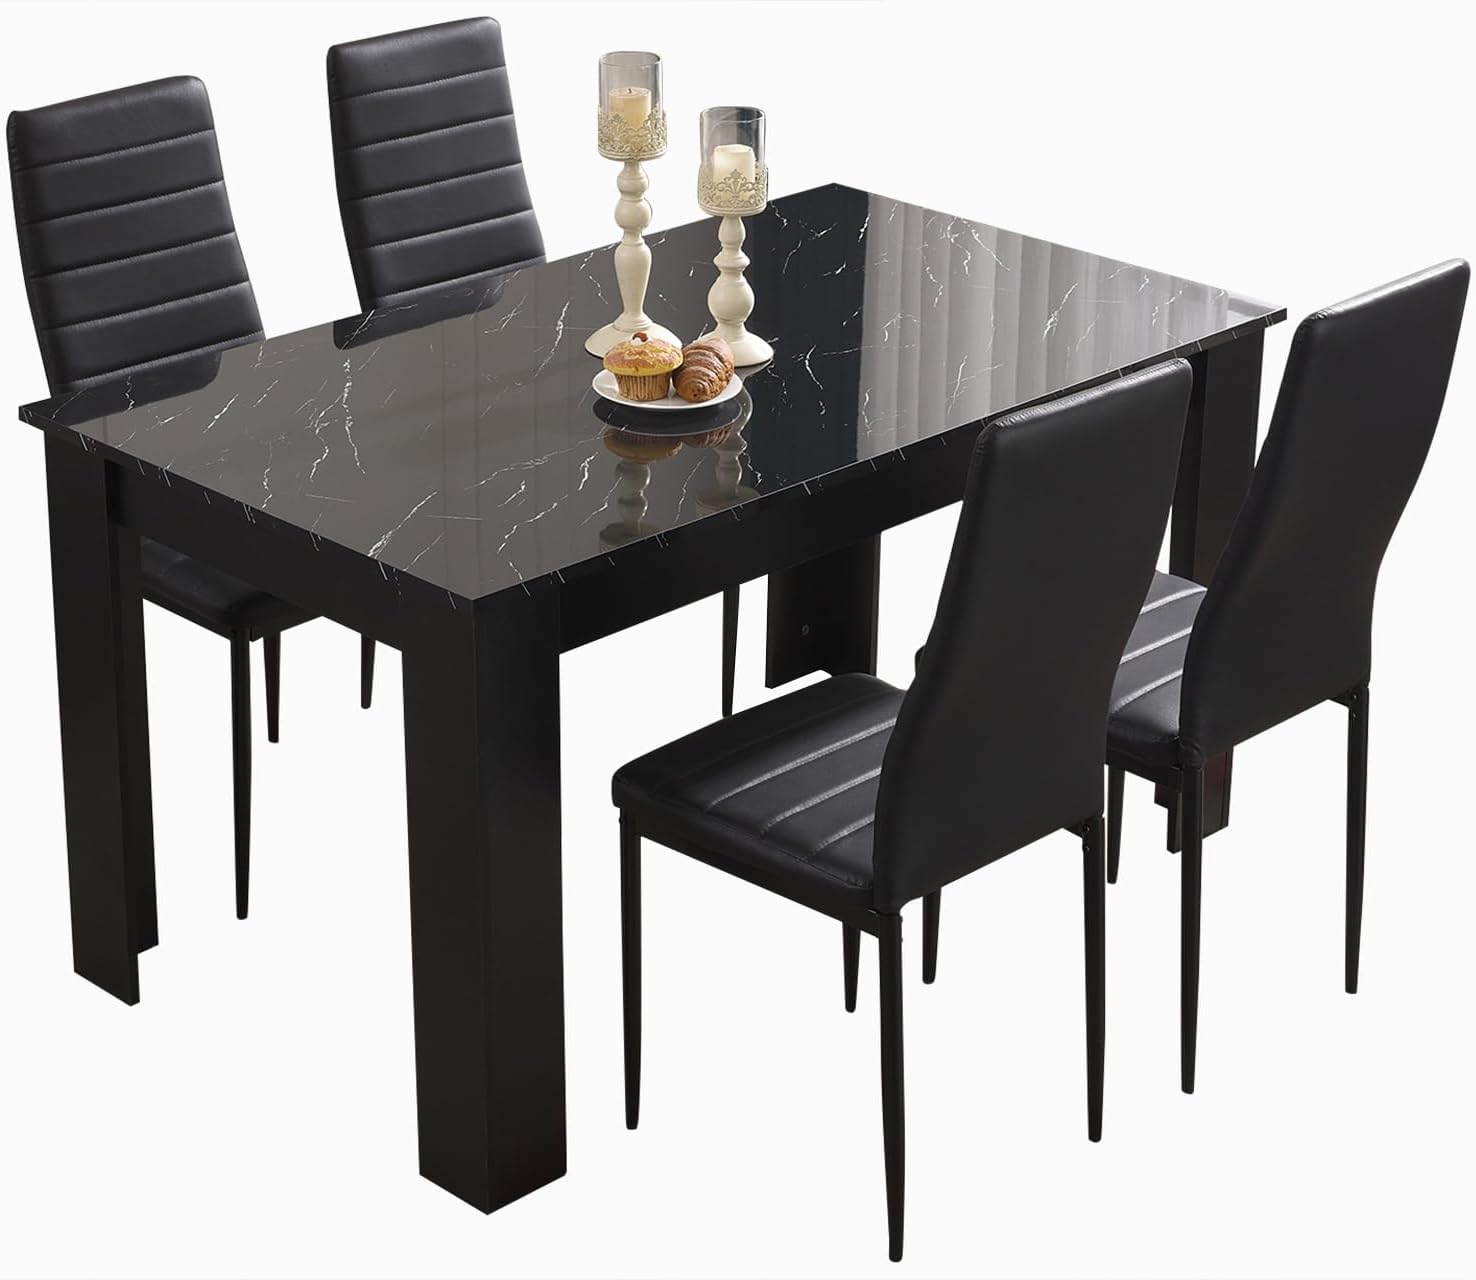 Best Set of Table and Chairs for Living Room - Top Picks for Your Home